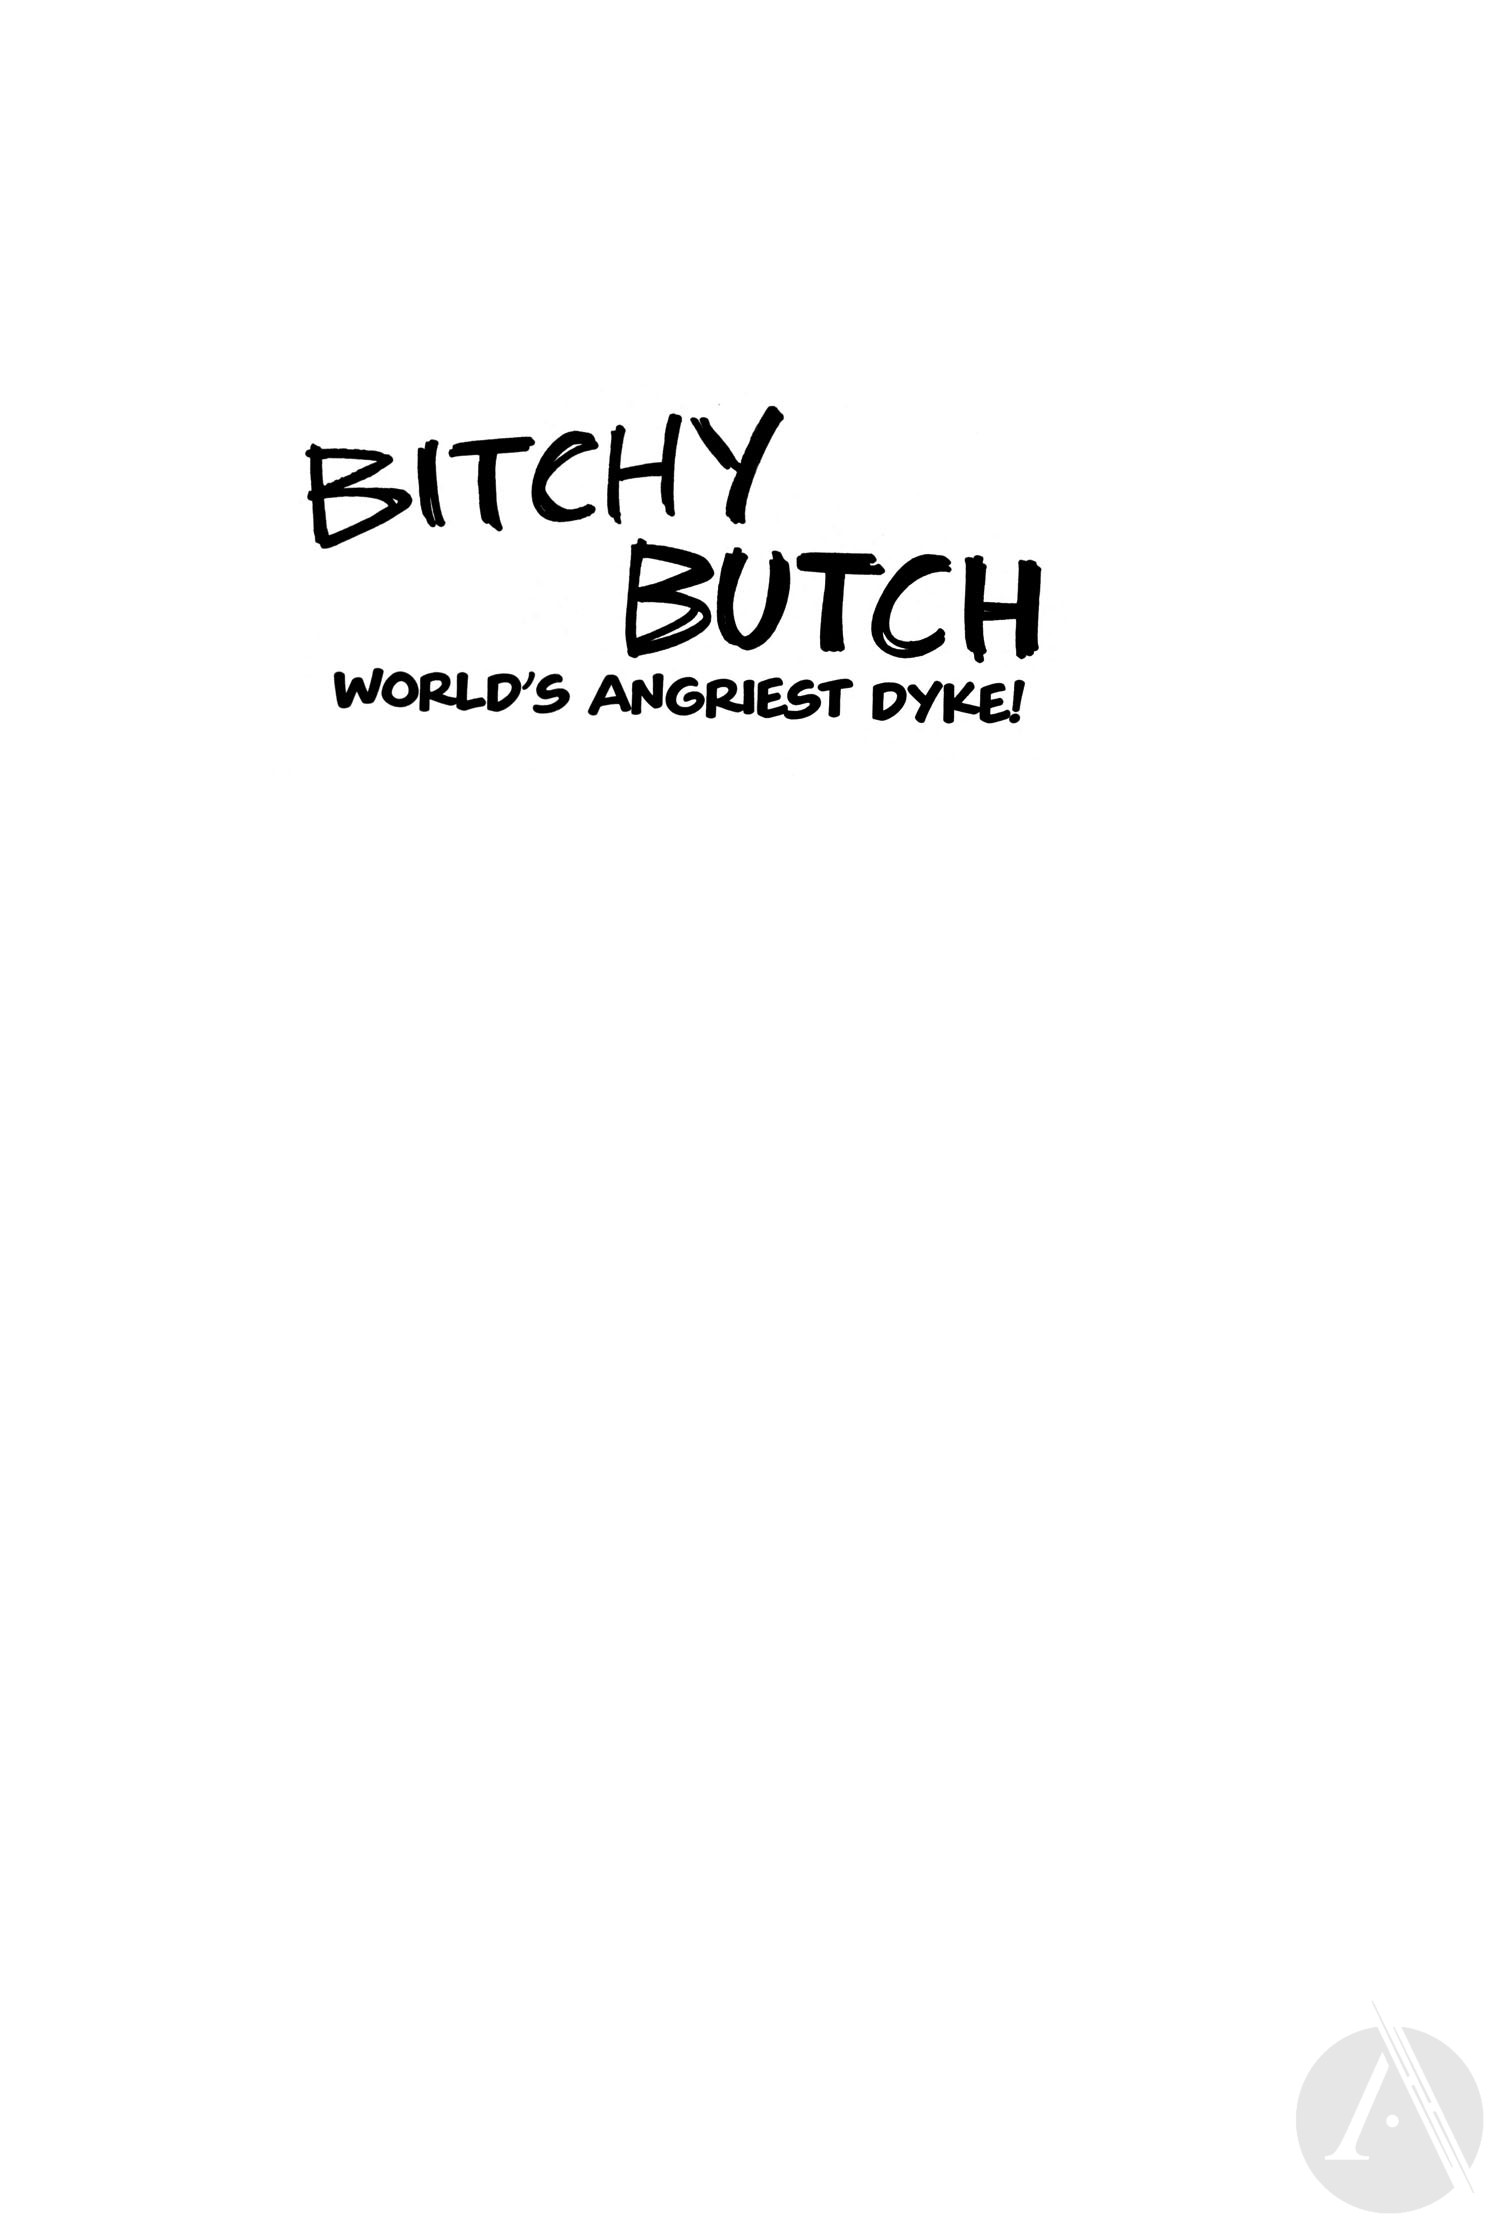 Read online Bitchy Butch: World's Angriest Dyke comic -  Issue # TPB - 3